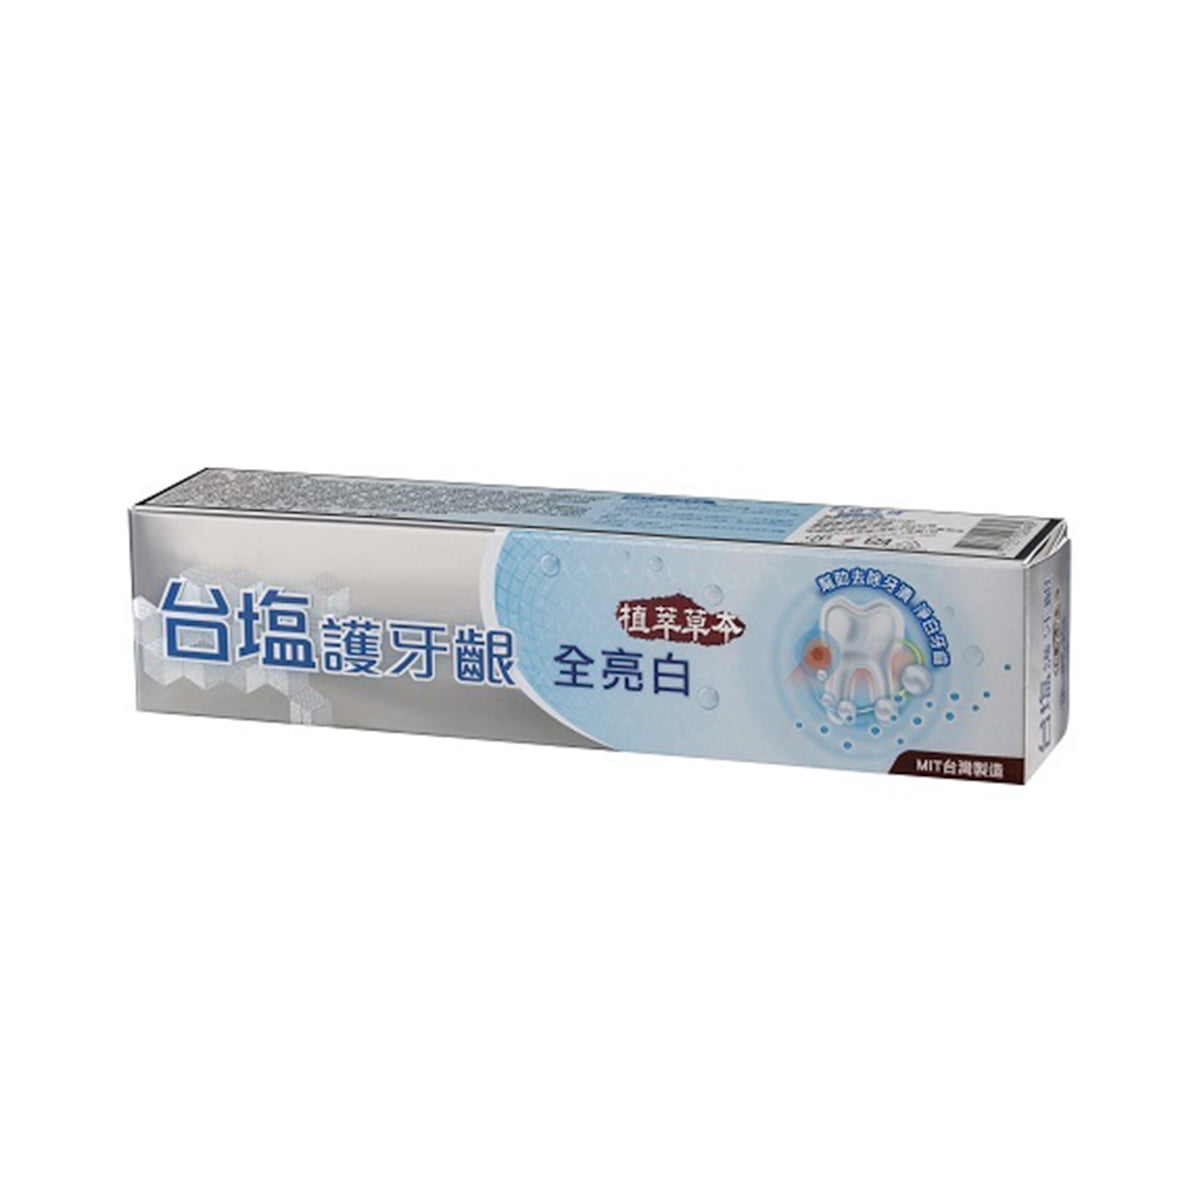 【TAIYEN】 Gums Intensive Care Toothpaste (Whitening) 140g